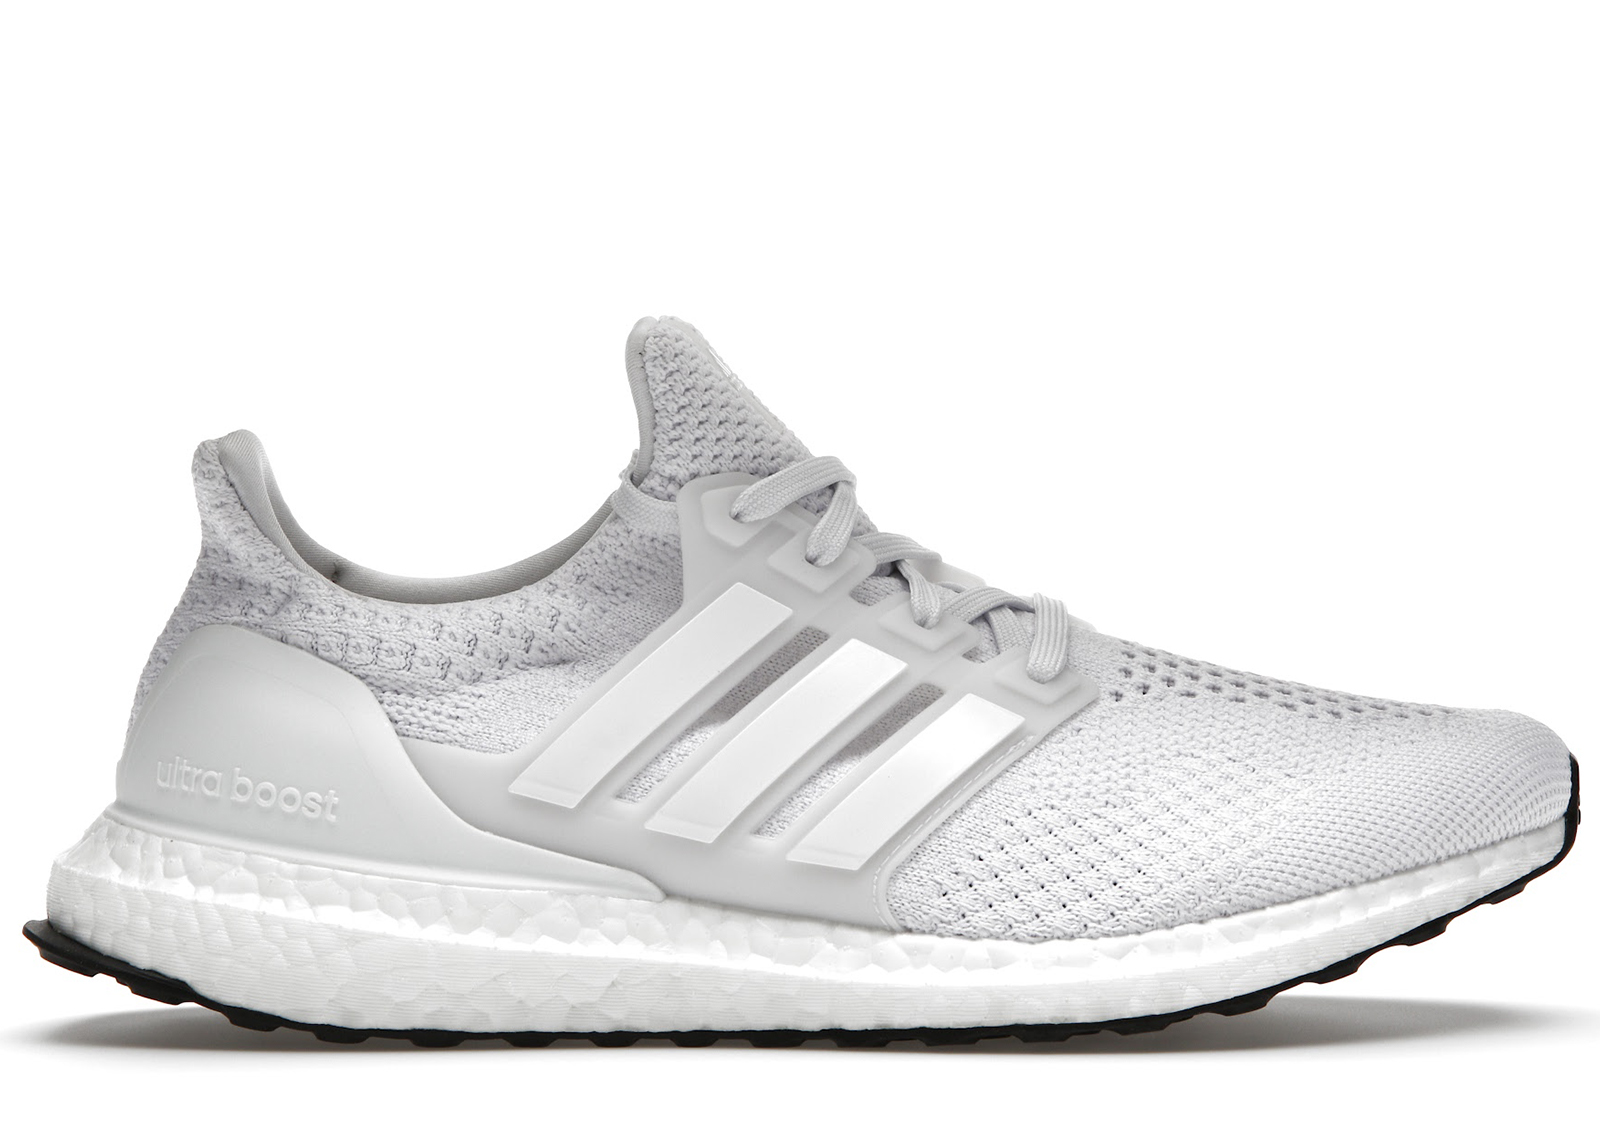 adidas ultra boost dna white